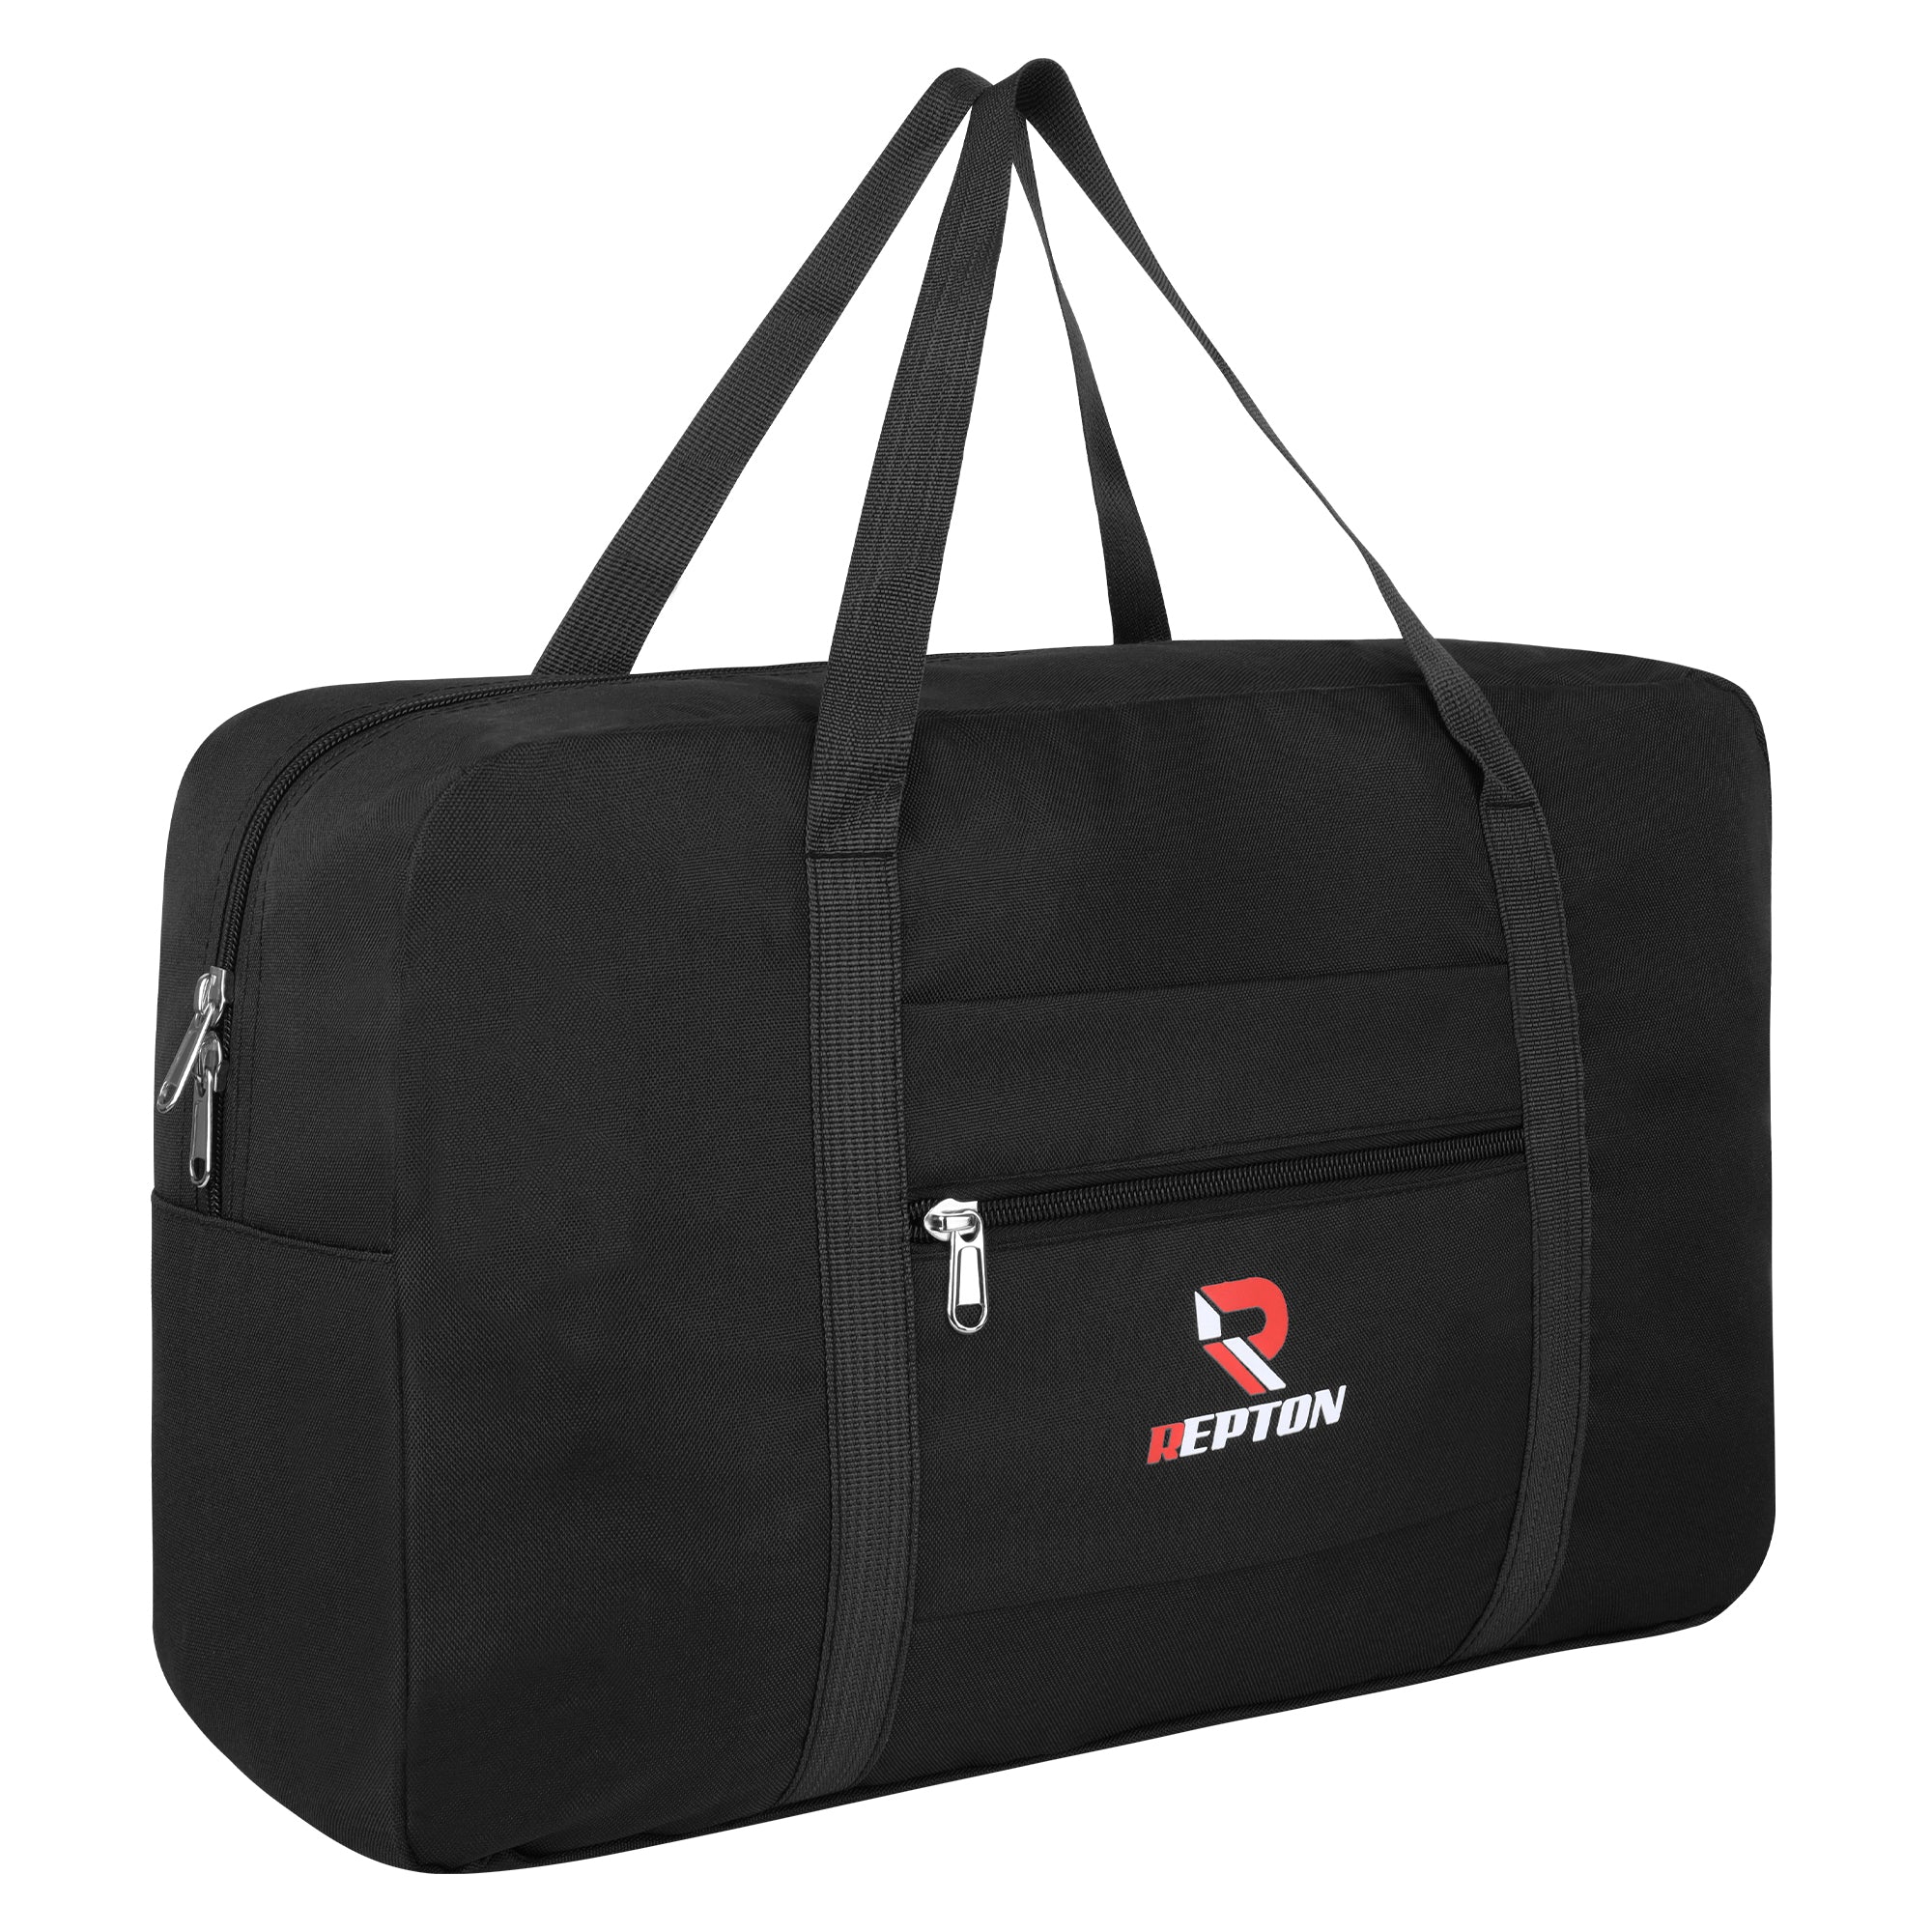 Carry on Hand Luggage Weekend Bag for Men & Women Repton Fitness and Boxing Gears